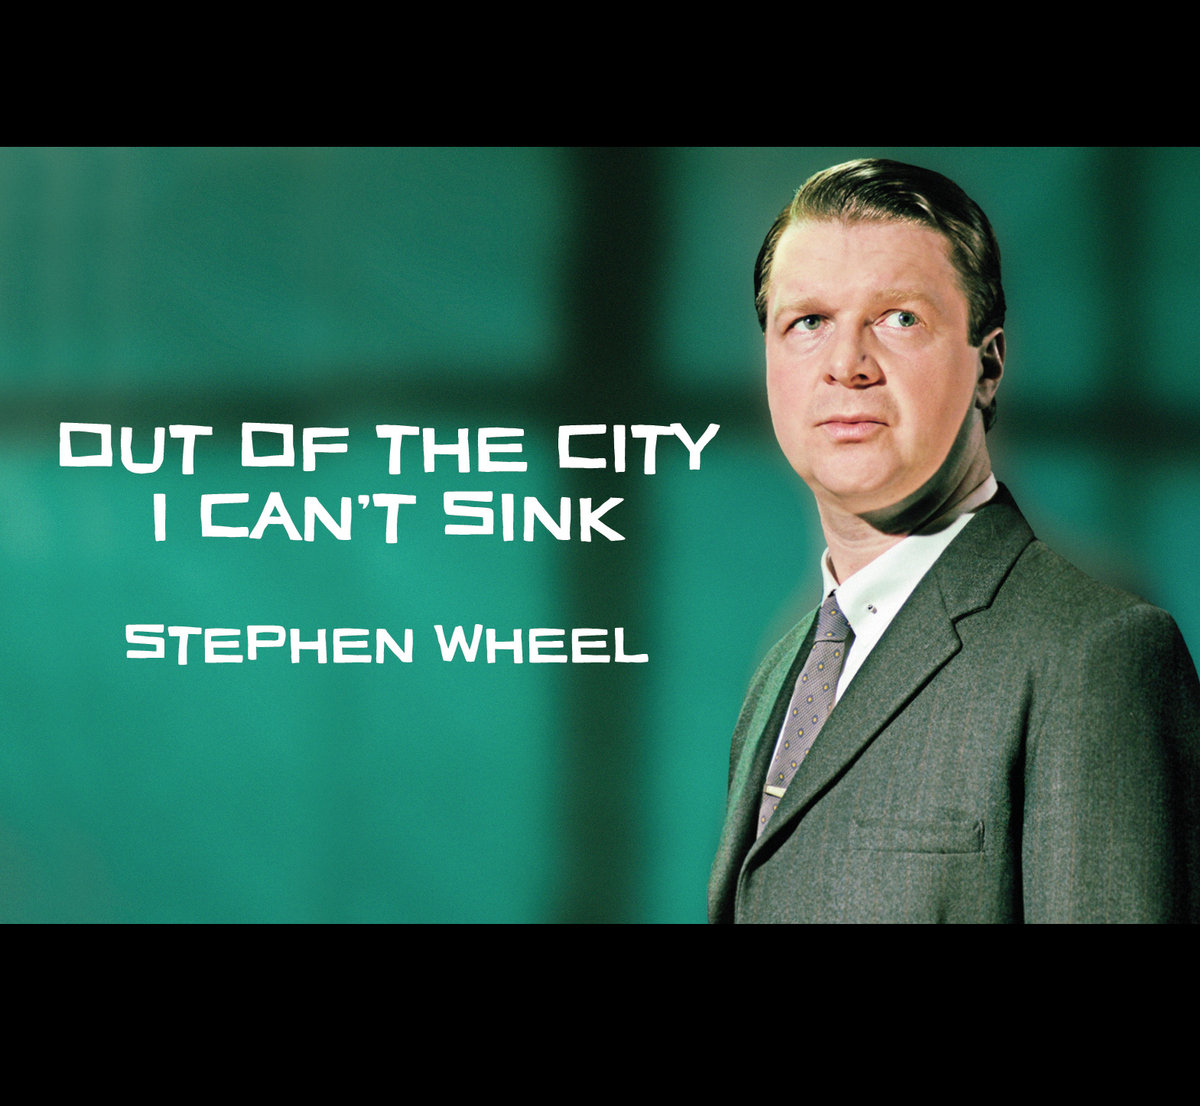 Stephen Wheel - Out of the City I Can't Sink